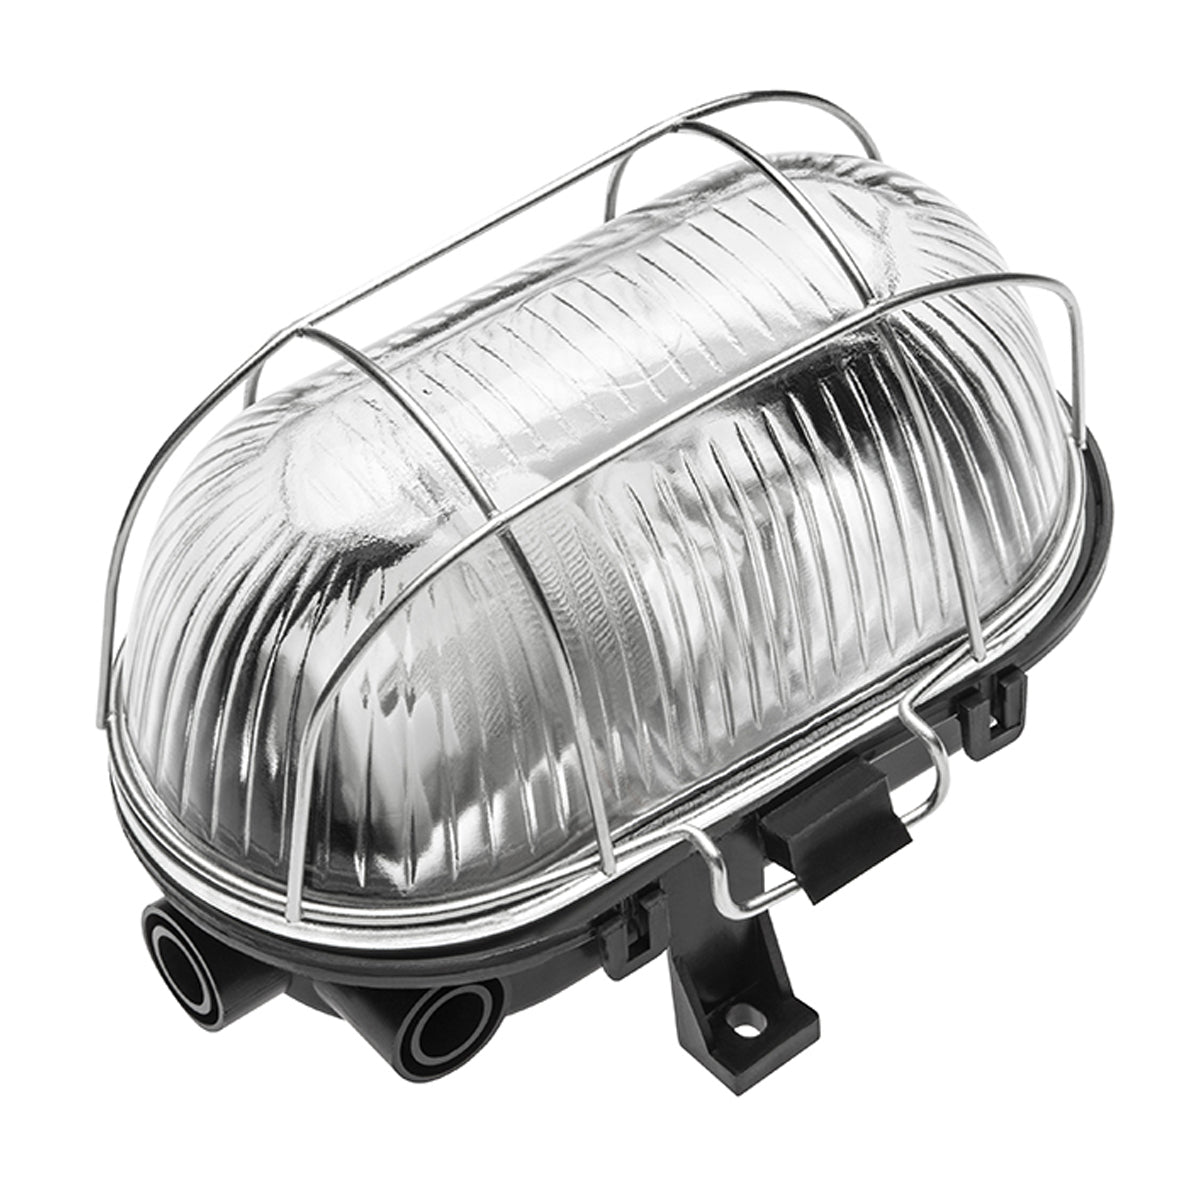 Our industrial style caged outdoor cage light is made from a high-quality polycarbonate body which is weather and rust proof and is complete with a prismatic glass diffuser and protective cage